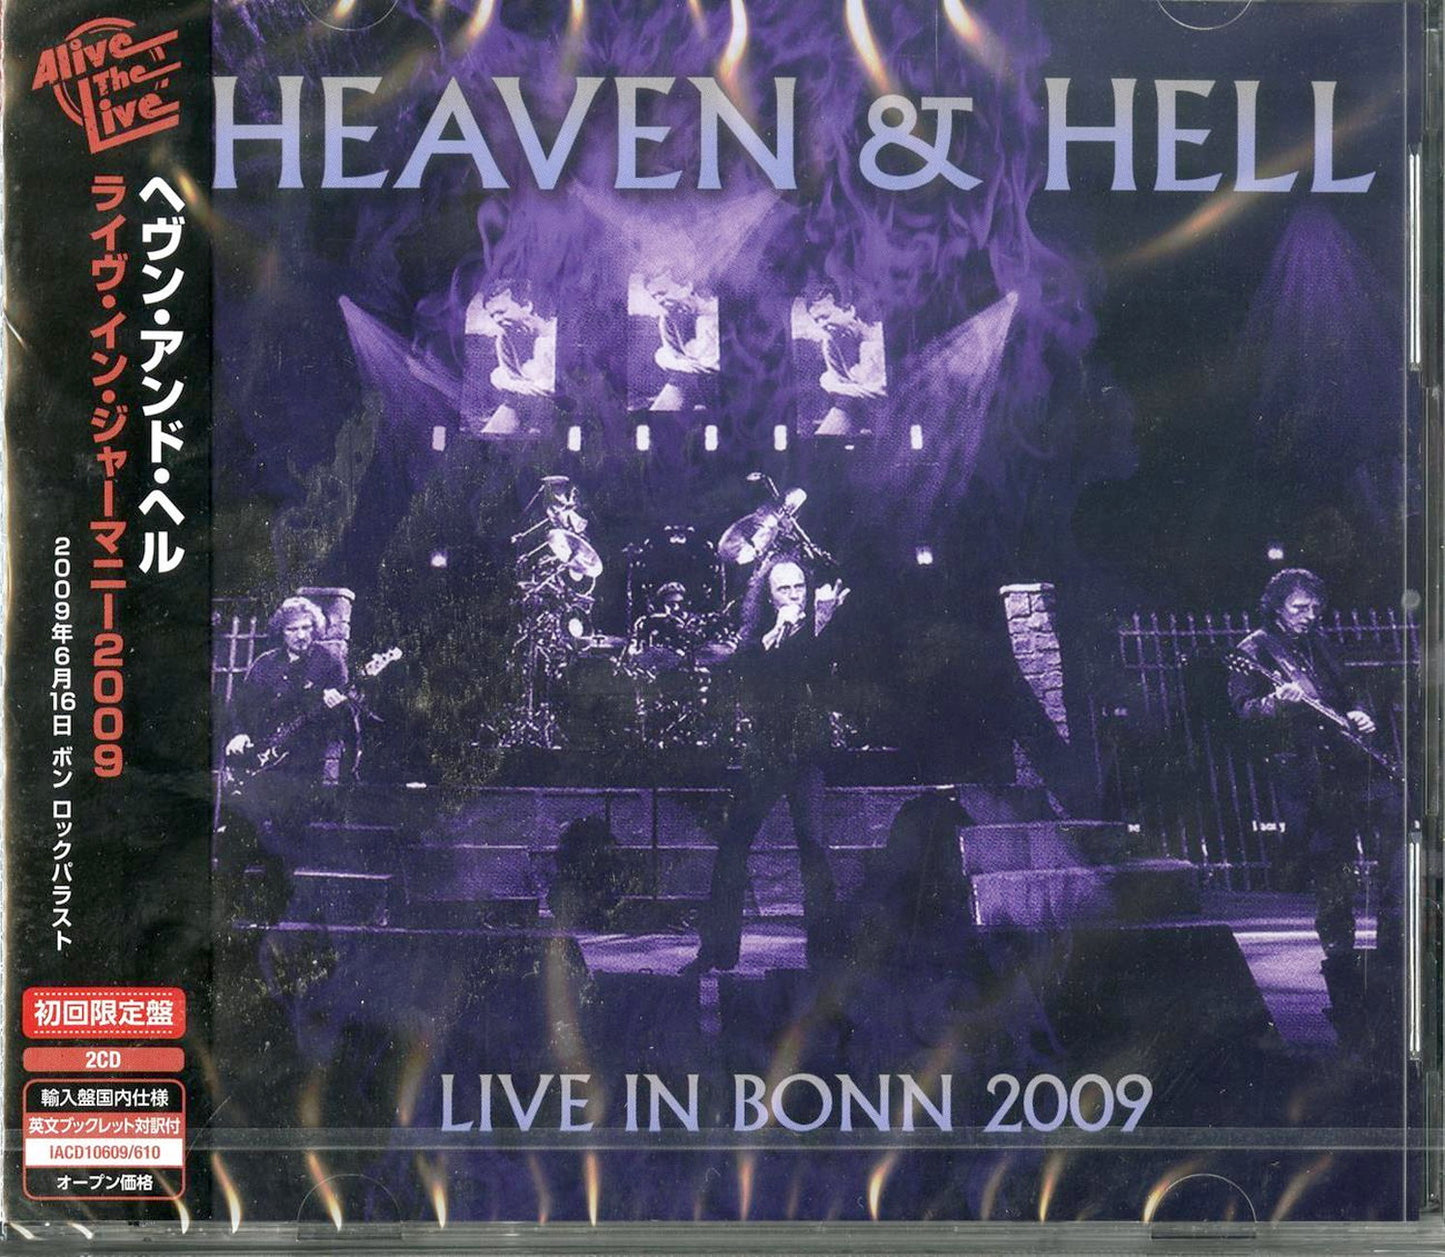 Heaven And Hell - Live In Bonn 2009 - Import 2 CD